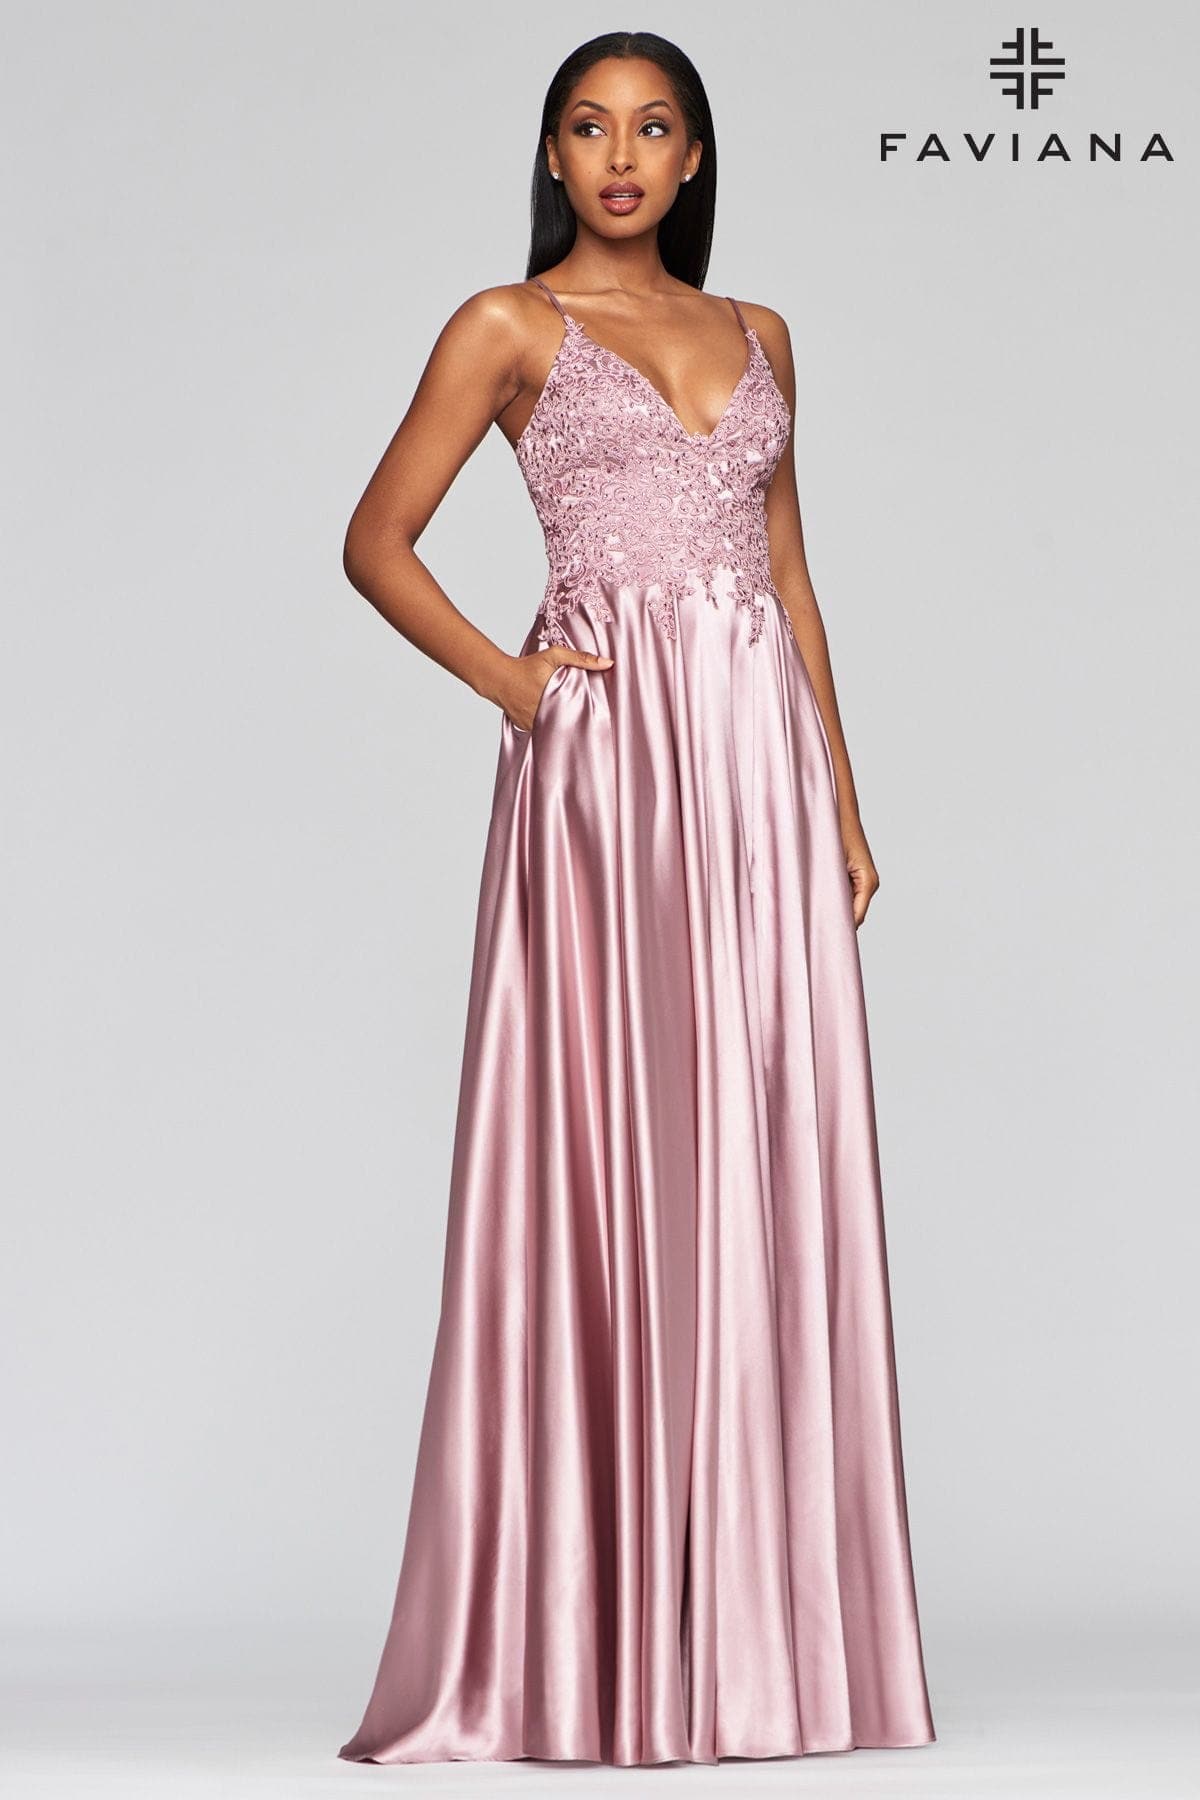 Long Flowy Prom Dress With Lace Bustier And Corset Back | S10400